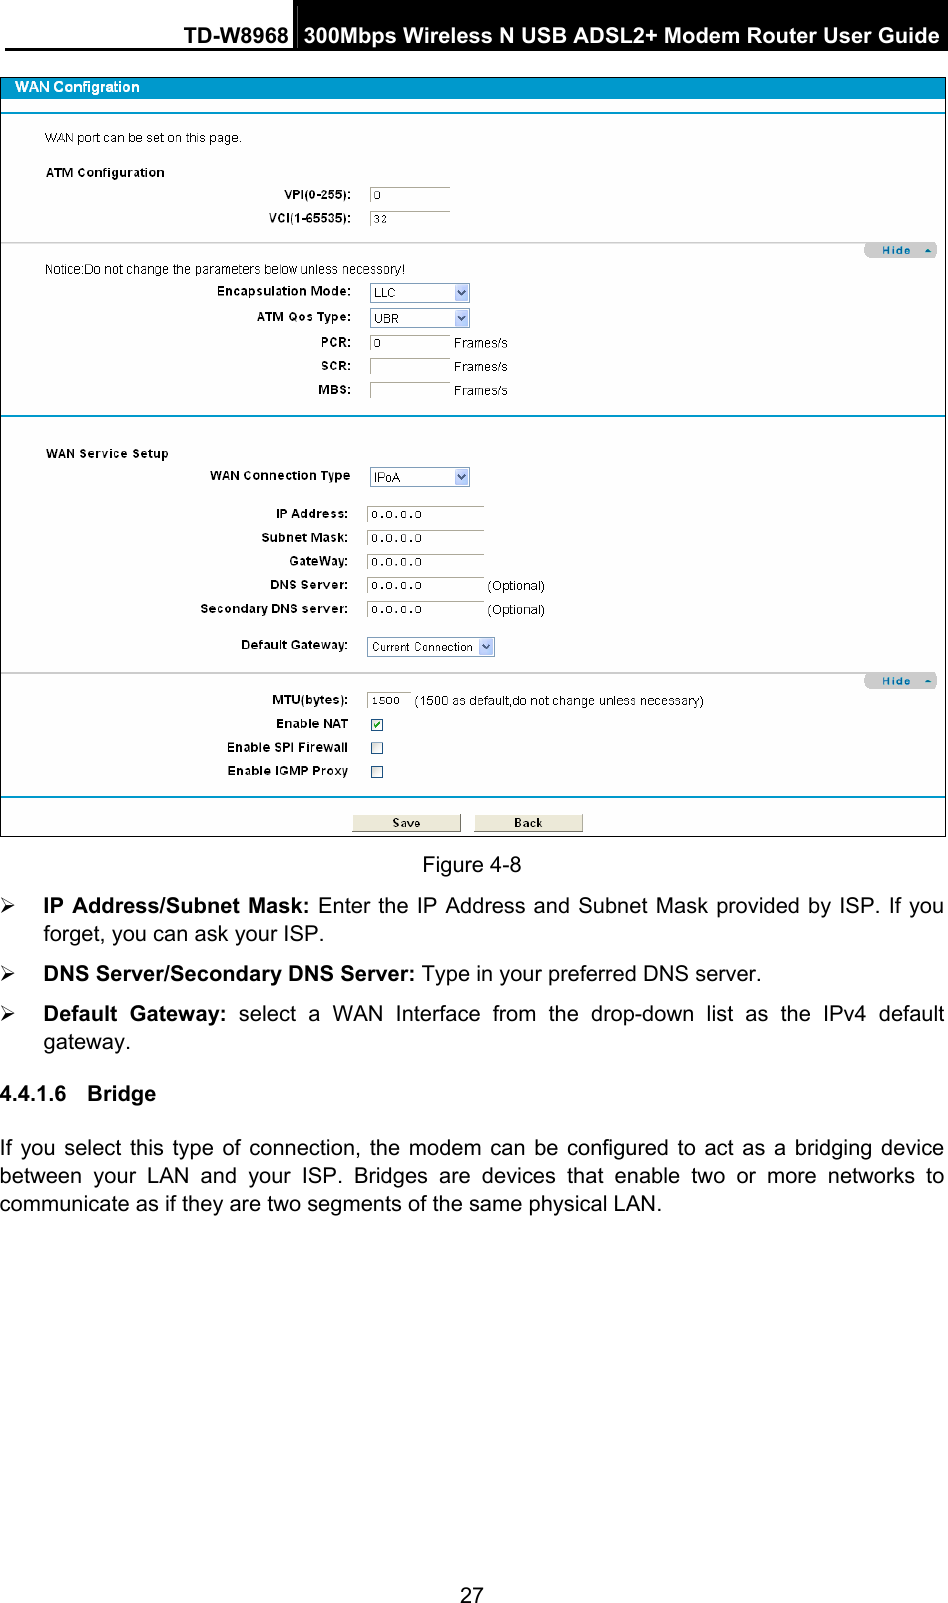 TD-W8968  300Mbps Wireless N USB ADSL2+ Modem Router User Guide 27  Figure 4-8 ¾ IP Address/Subnet Mask: Enter the IP Address and Subnet Mask provided by ISP. If you forget, you can ask your ISP. ¾ DNS Server/Secondary DNS Server: Type in your preferred DNS server. ¾ Default Gateway: select a WAN Interface from the drop-down list as the IPv4 default gateway. 4.4.1.6  Bridge  If you select this type of connection, the modem can be configured to act as a bridging device between your LAN and your ISP. Bridges are devices that enable two or more networks to communicate as if they are two segments of the same physical LAN.  